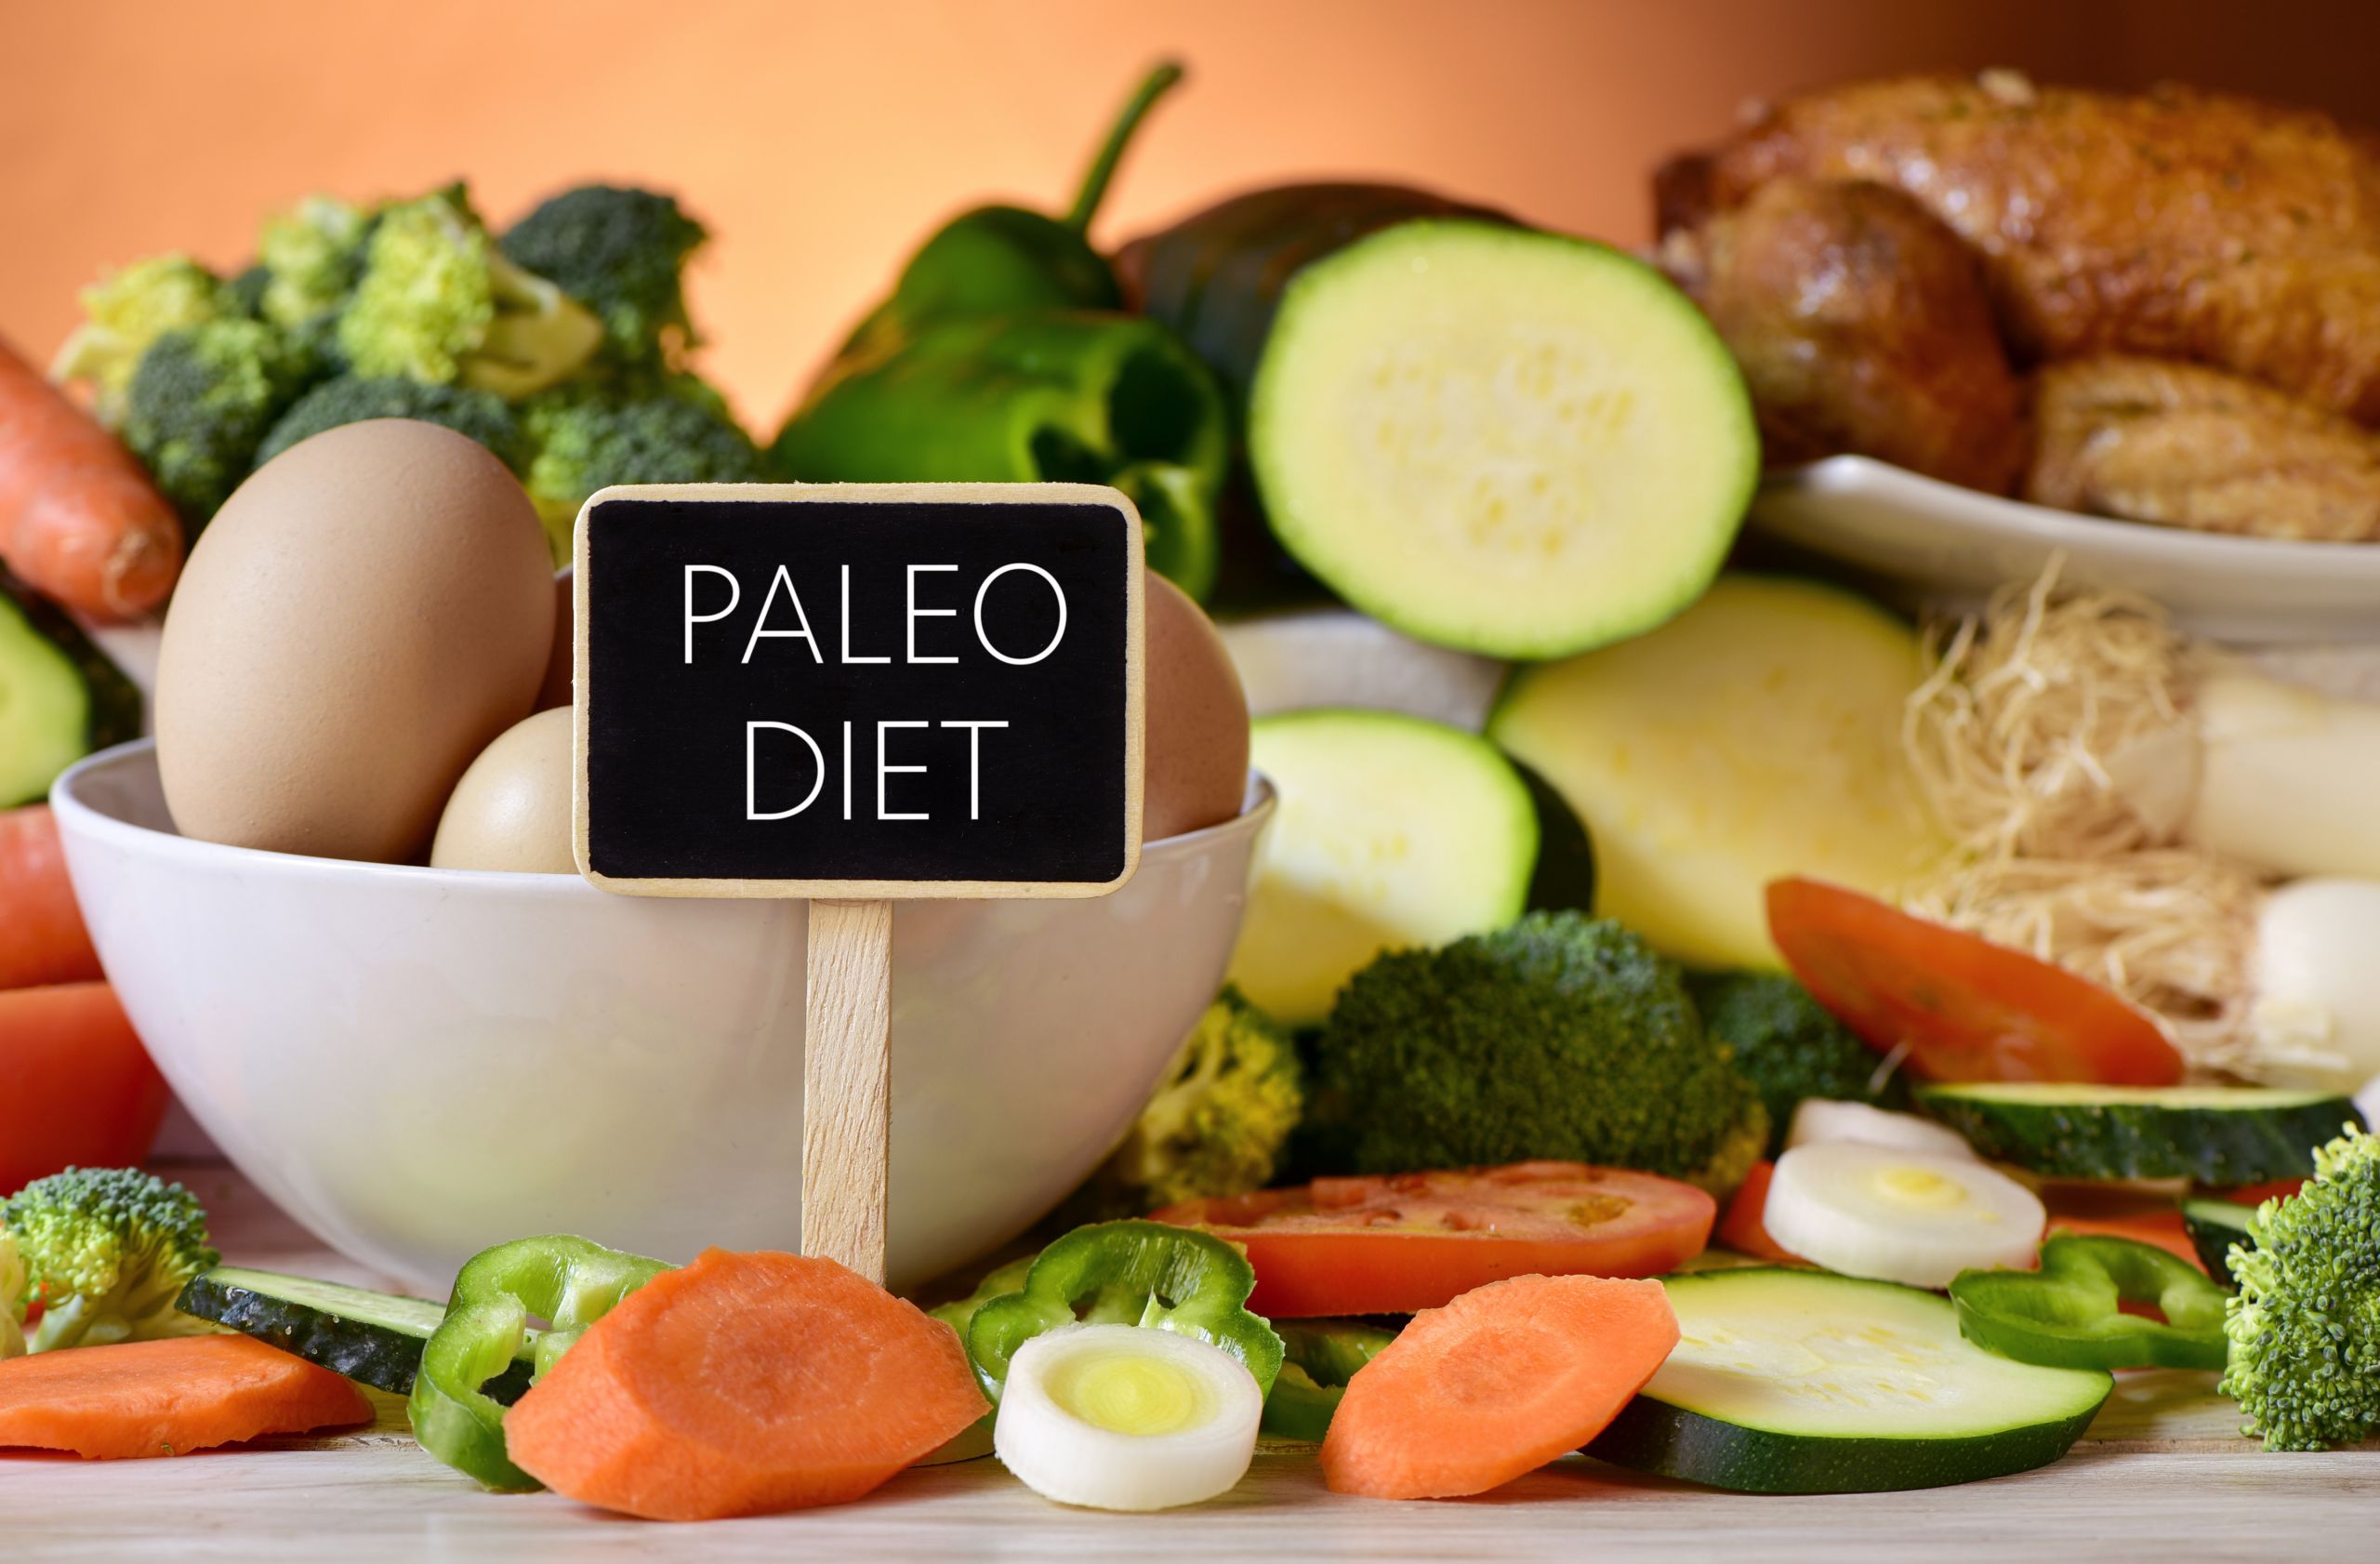 Paleo Primal Diet New the Paleo Diet A Detailed Look at the Good &amp; the Bad